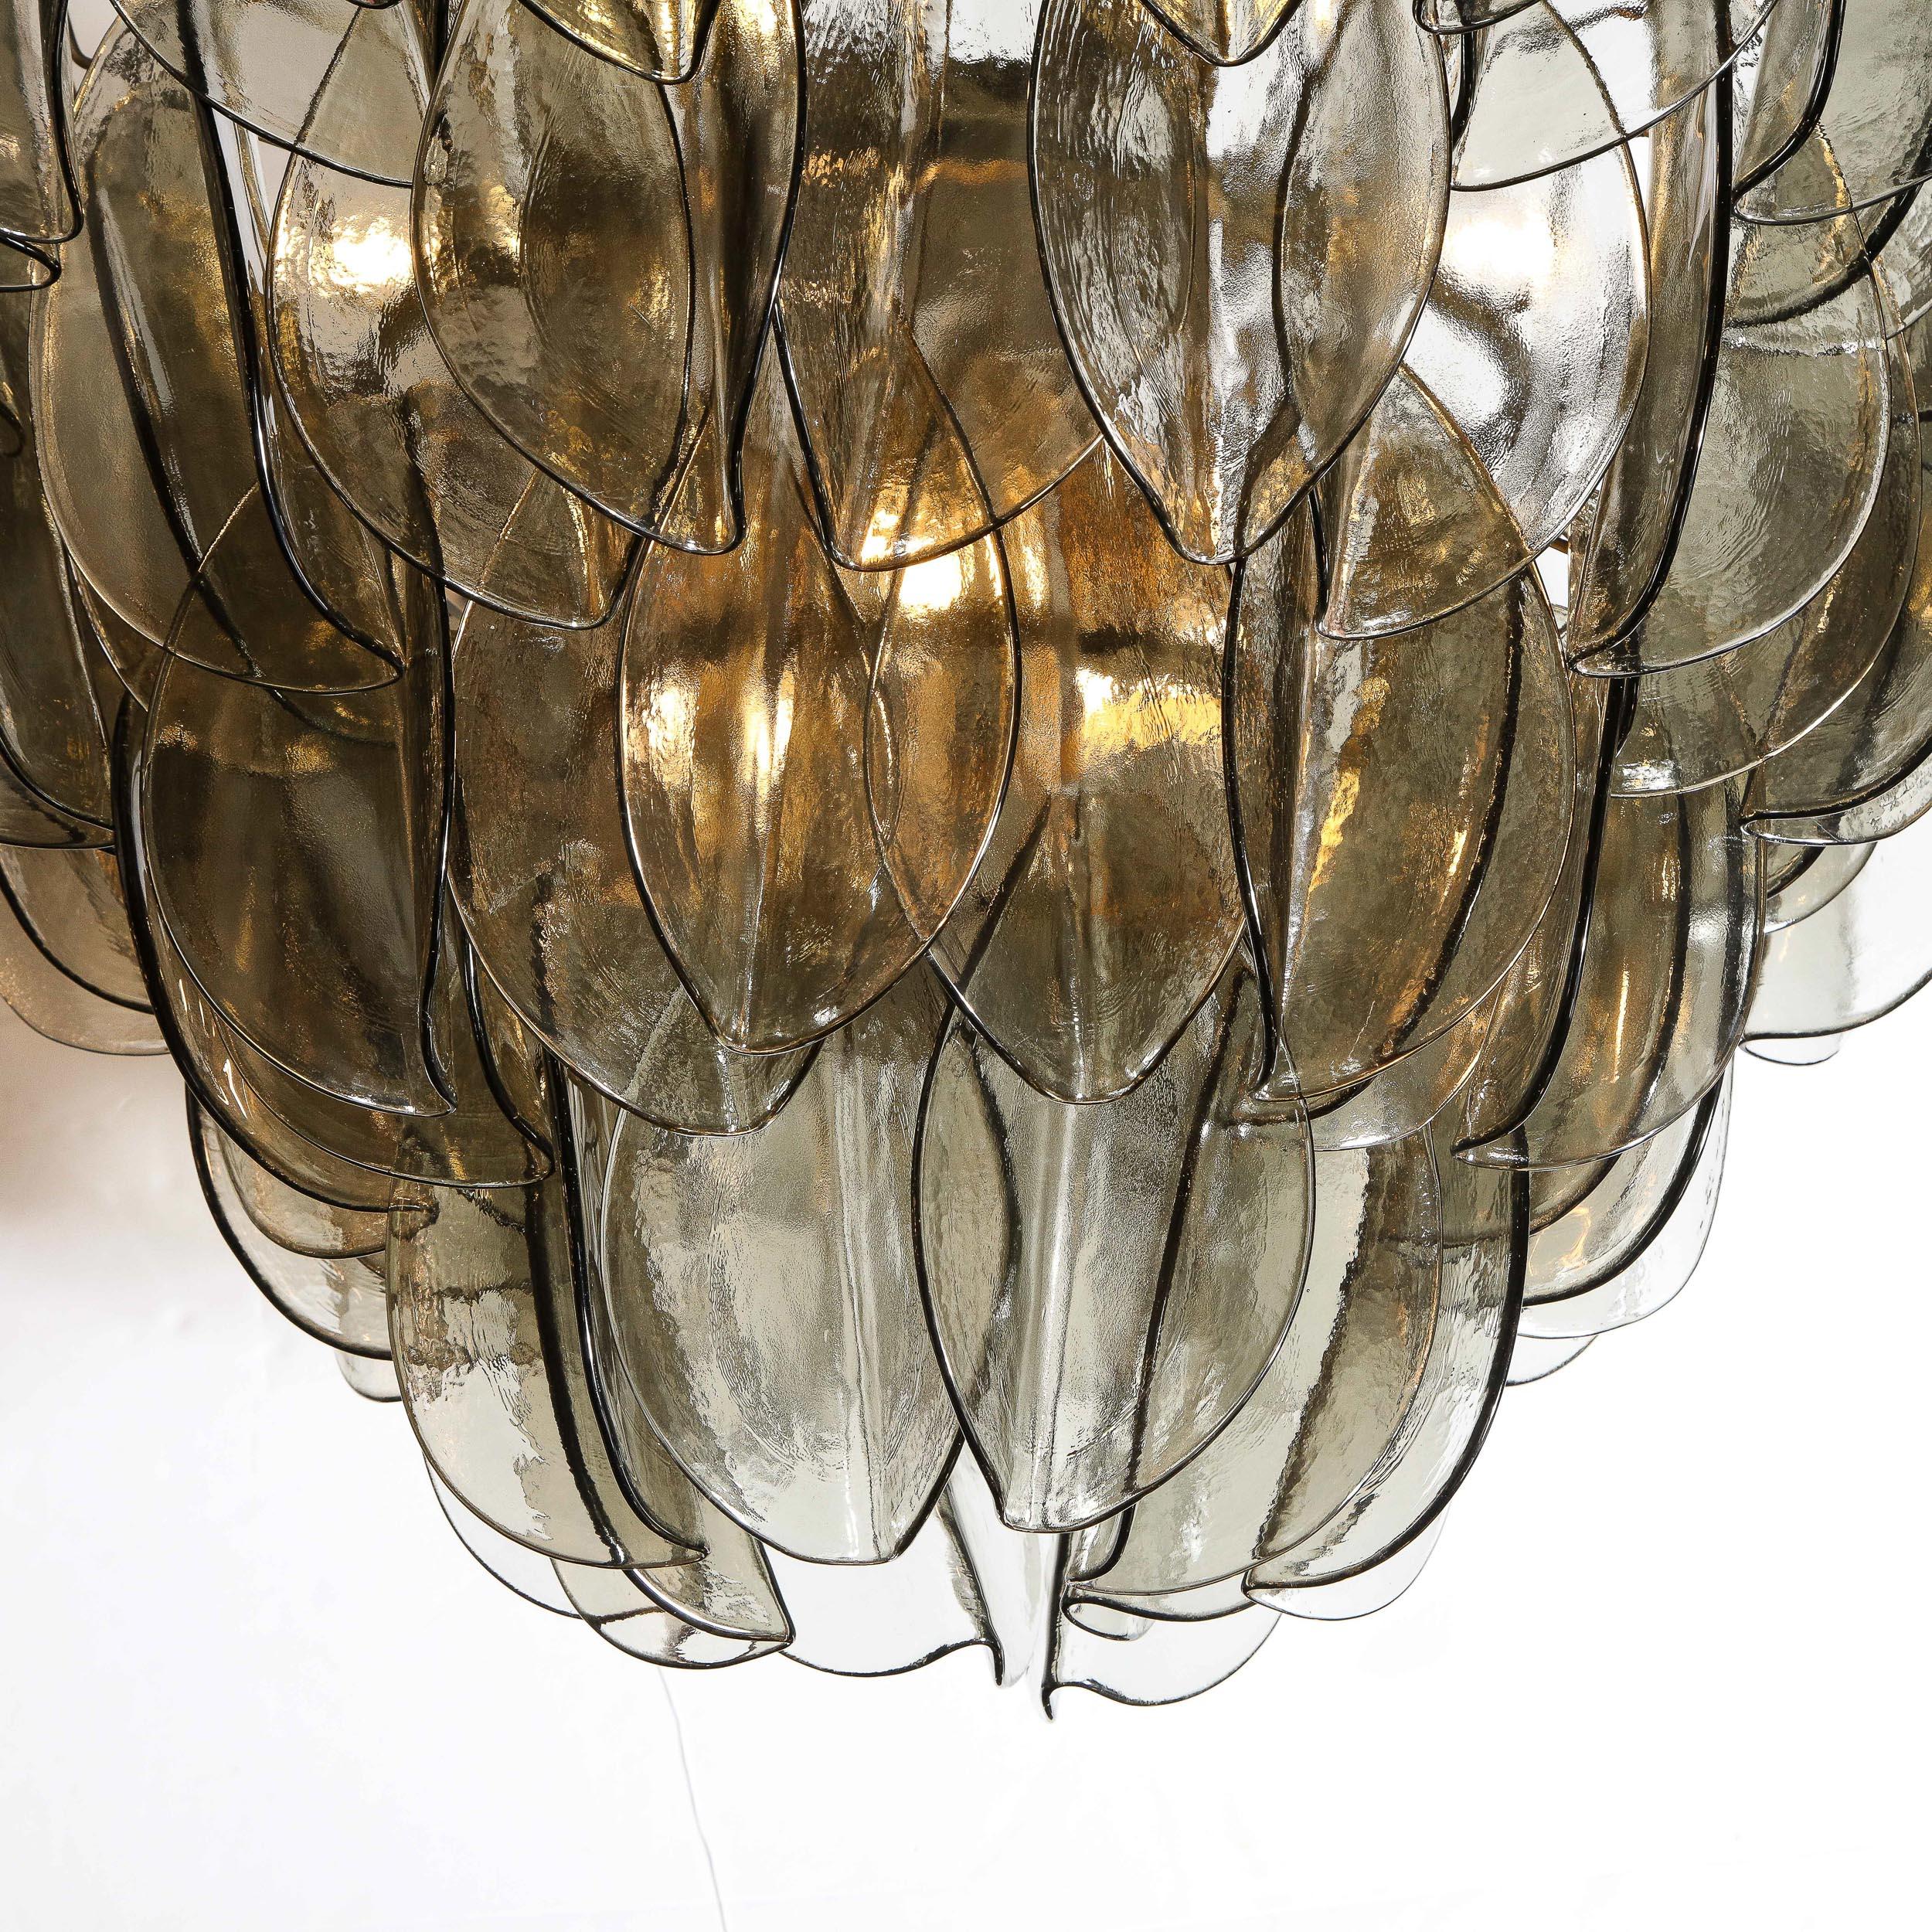 This refined and sophisticated chandelier was realized in Murano, Italy- the islands off the coast of Venice renowned for centuries for their superlative quality glass production. It offers an abundance of handblown Murano glass shades in a Topaz